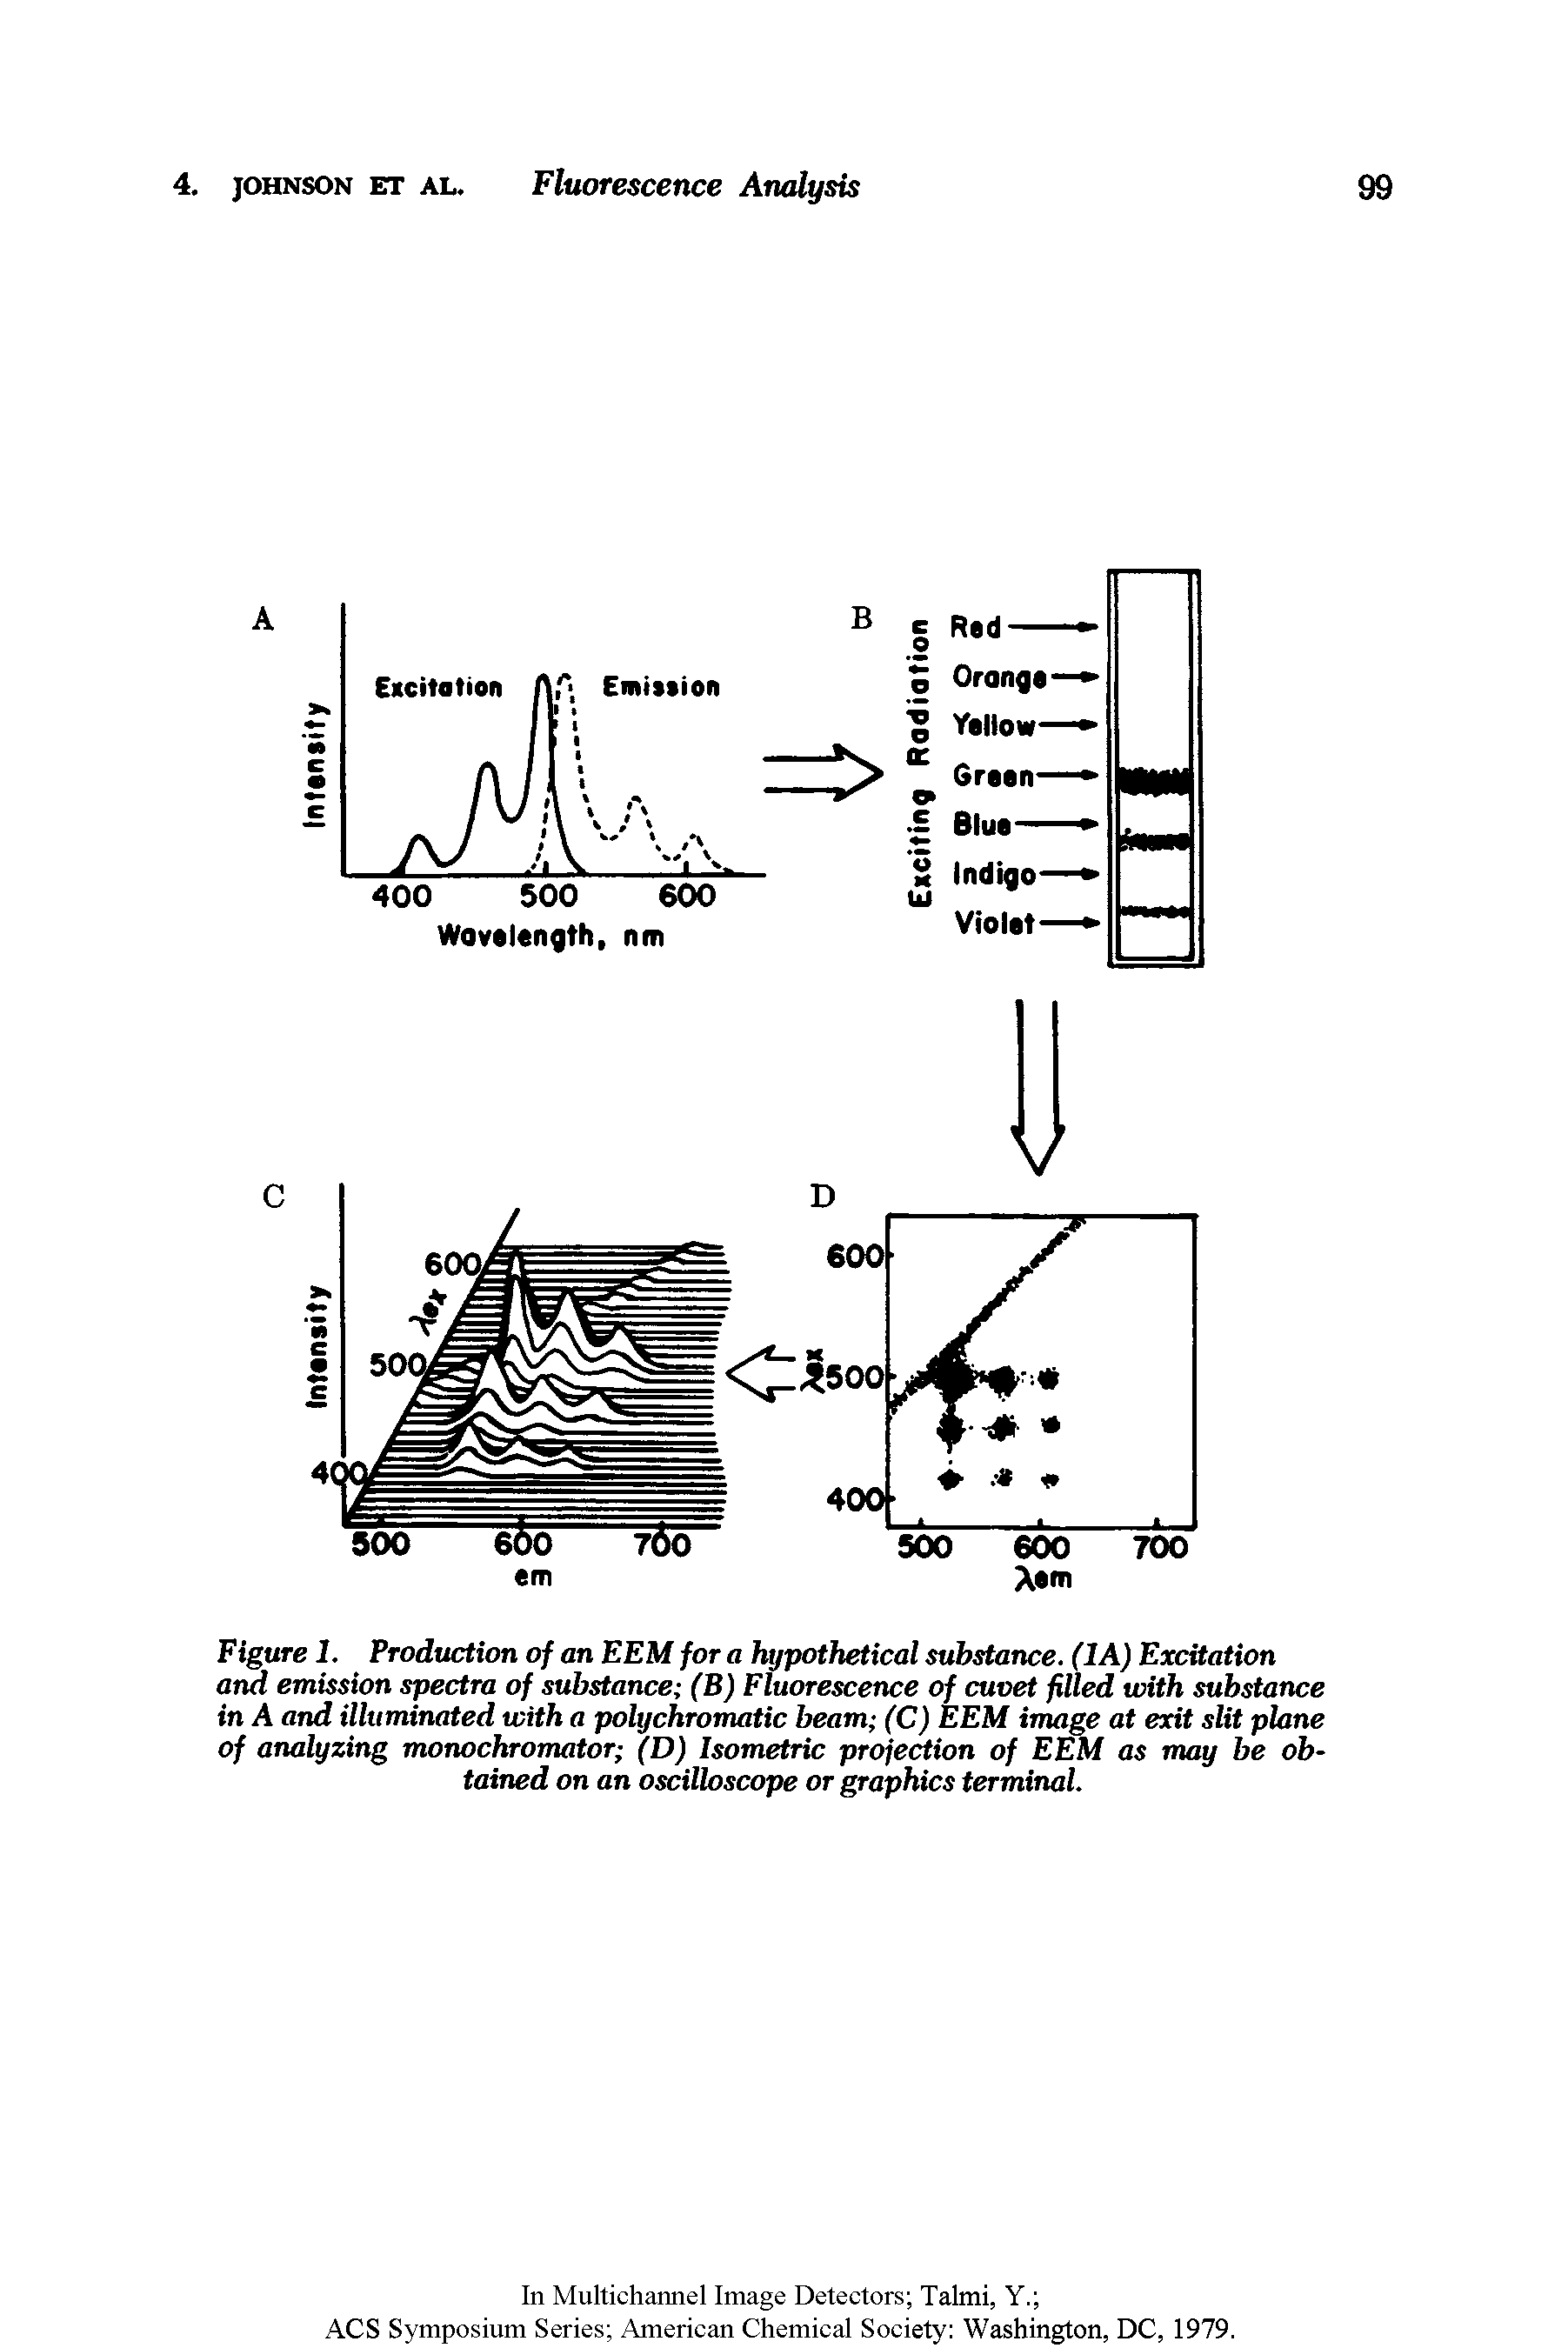 Figure 1. Production of an EEM for a hypothetical substance. (1A) Excitation and emission spectra of substance (B) Fluorescence of cuvet filled with substance in A and illuminated with a polychromatic beam (C) EEM image at exit slit plane of analyzing monochromator (D) Isometric projection of EEM as may be obtained on an oscilloscope or graphics terminal.